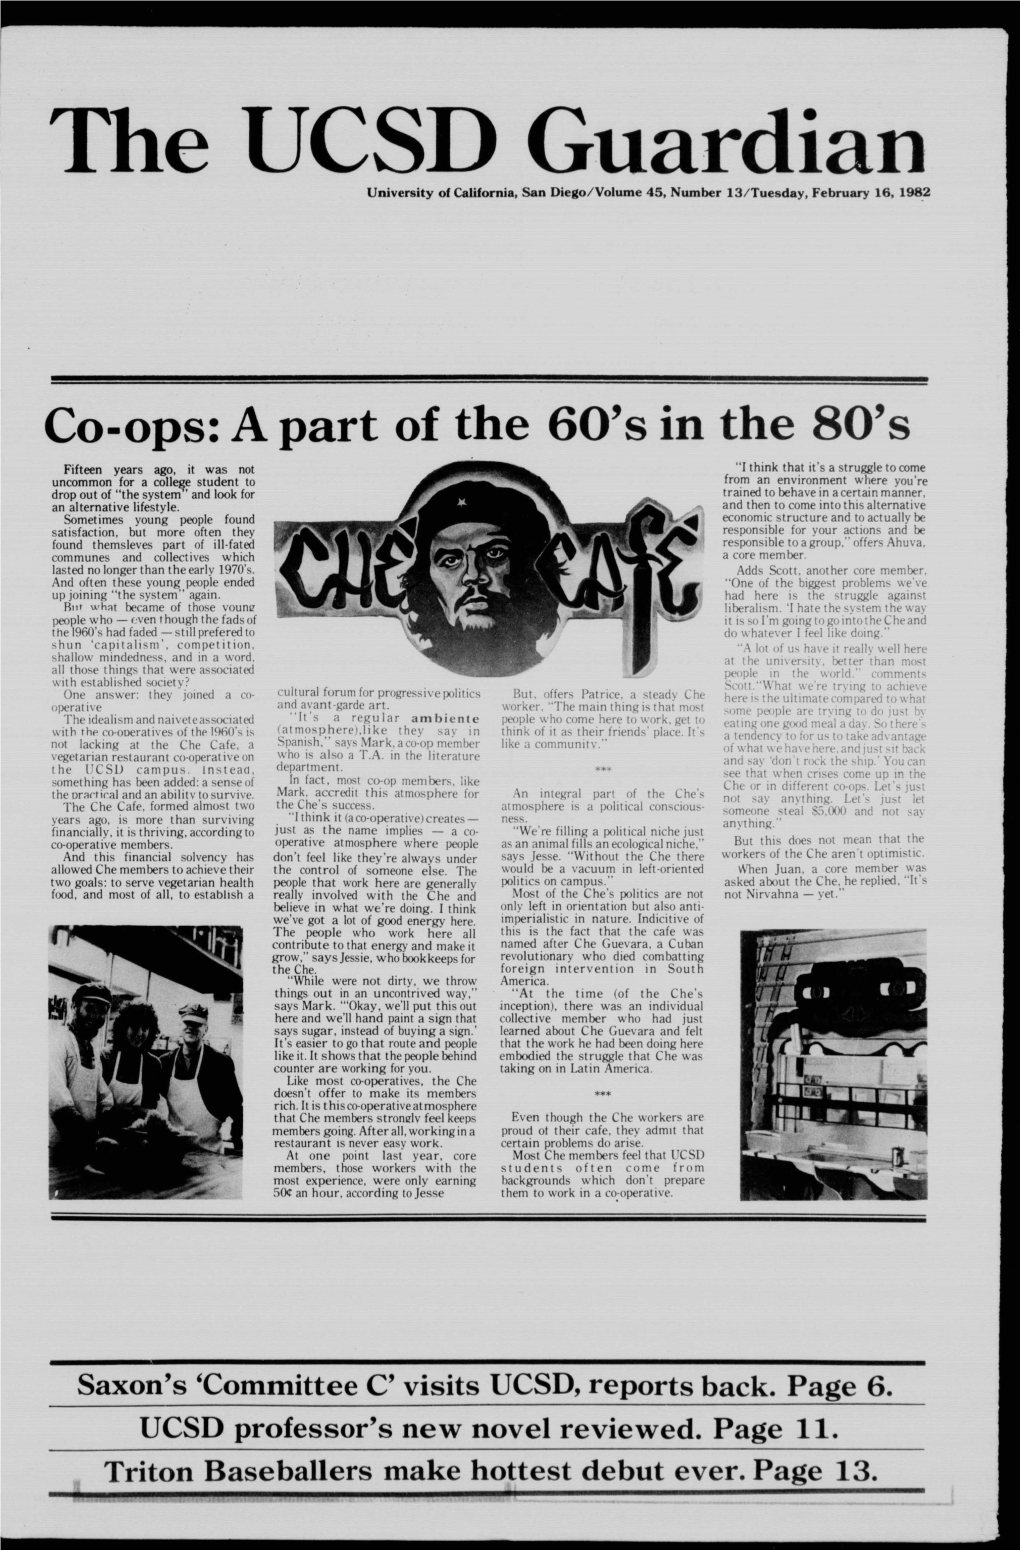 Co-Ops: a Part of the 60'S in the 80'S